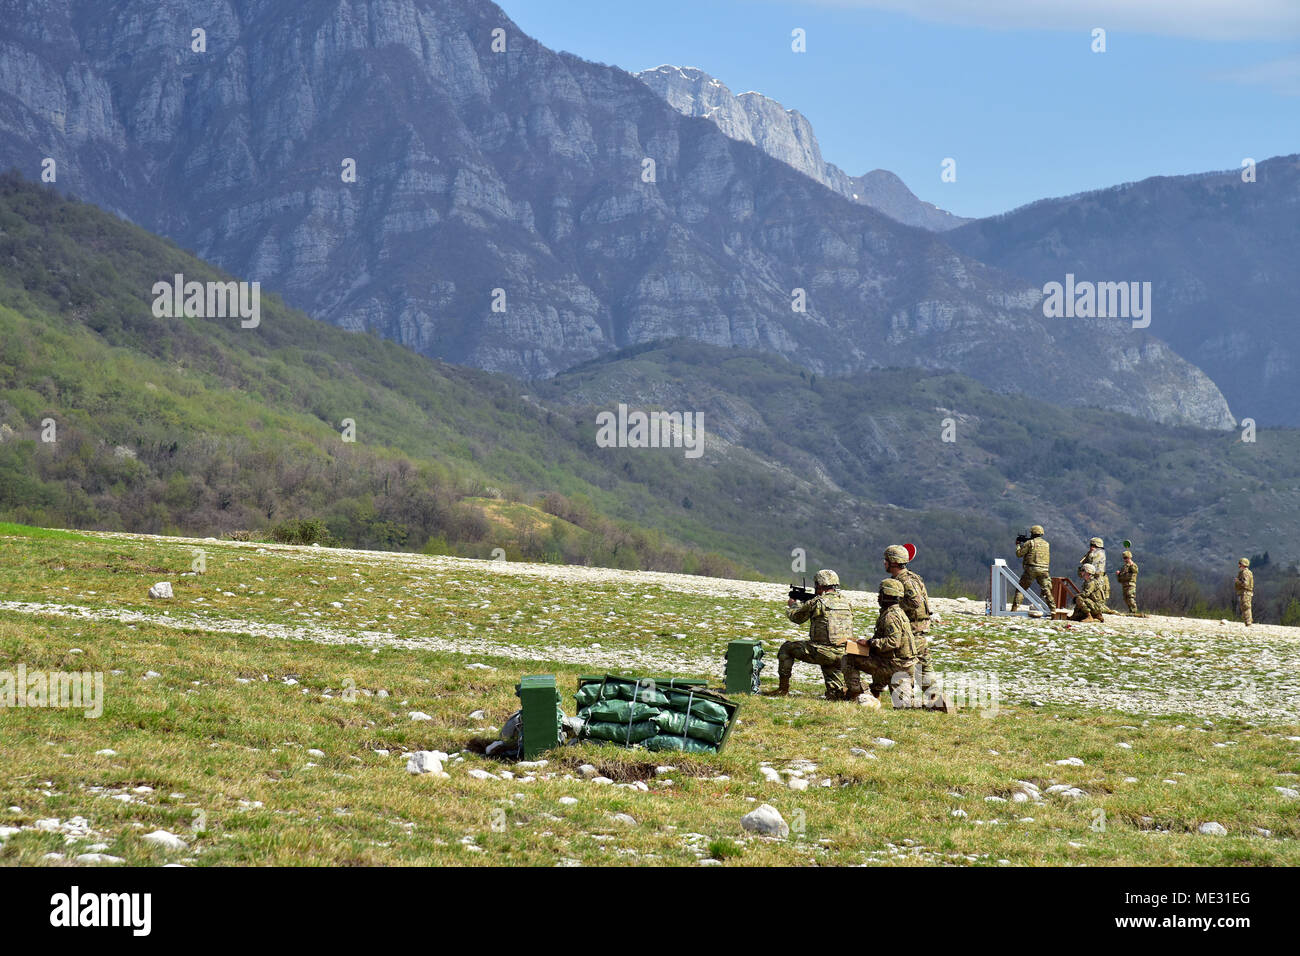 U.S. Army Paratroopers assigned to the Battalion Support Brigade, 173rd Airborne Brigade engage a targets with M320 grenade launcher module during weapons qualification at Cao Malnisio Range, Pordenone, Italy, April 17, 2018. The 173rd Airborne Brigade is the U.S. Army Contingency Response Force in Europe, capable of projecting ready forces anywhere in the U.S. European, Africa or Central Commands' areas of responsibility. (U.S. Army Photos by Paolo Bovo) Stock Photo